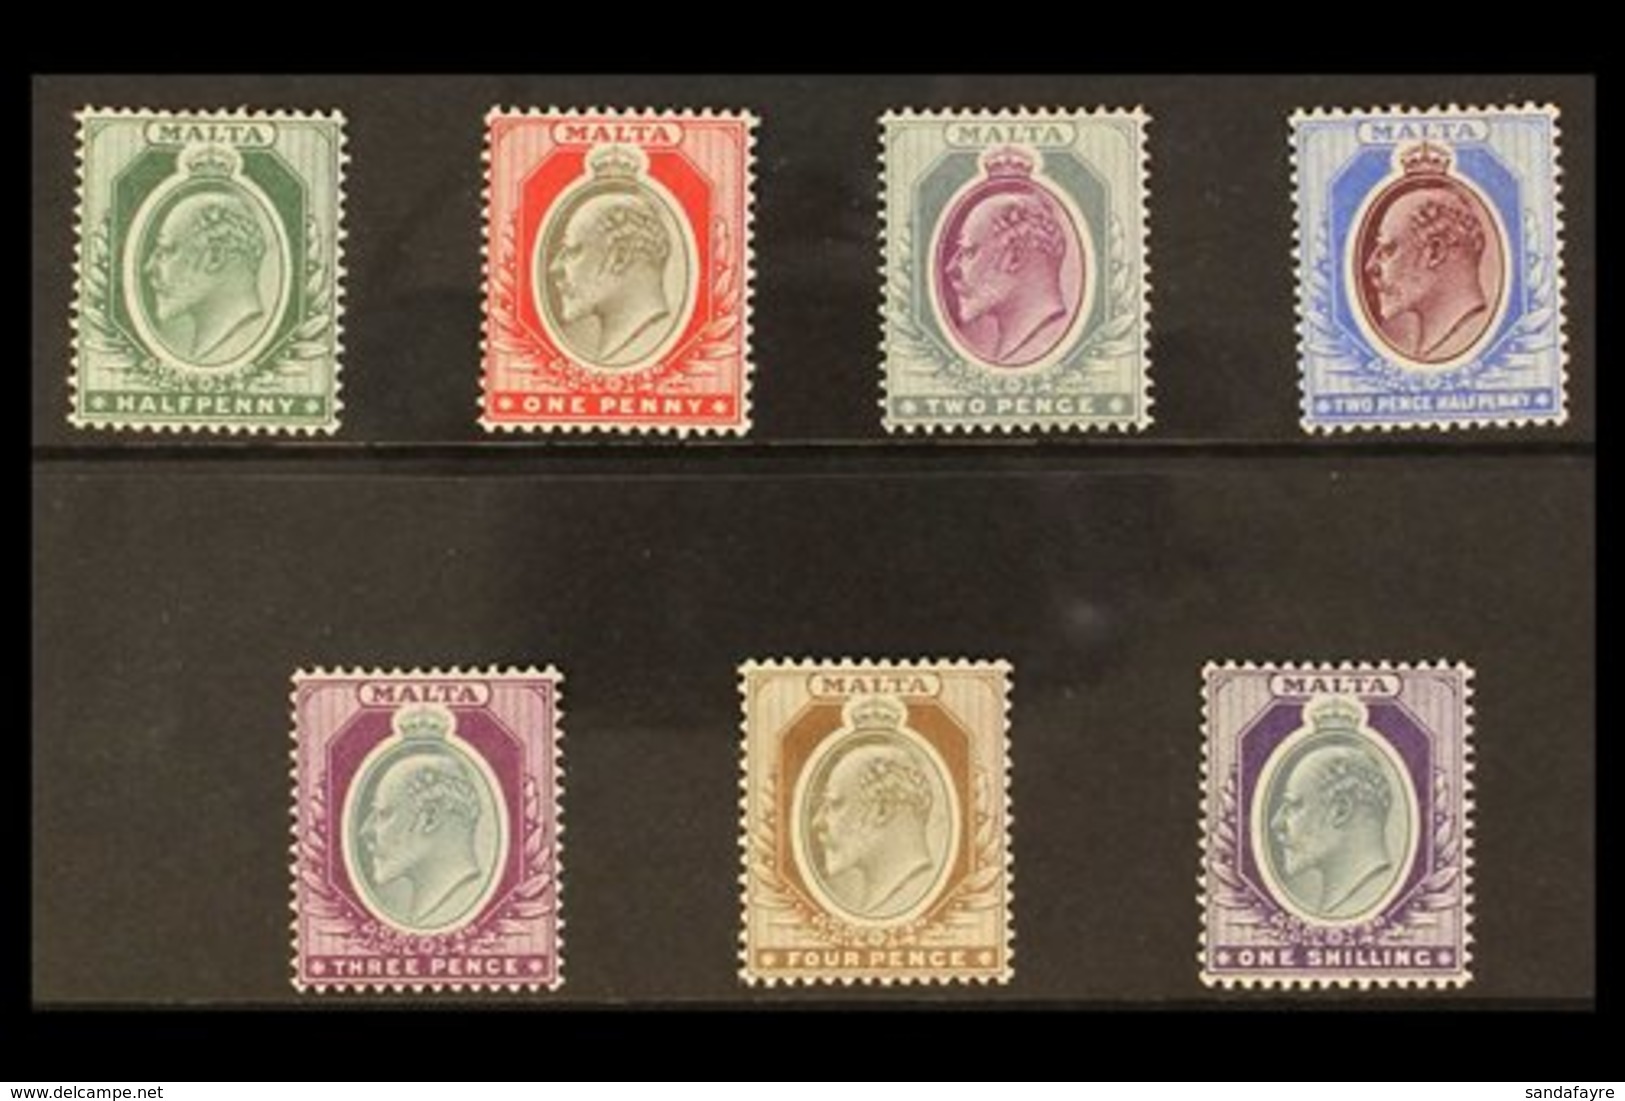 1903-04 KEVII (wmk Crown CA) Complete Set, SG 38/44, Very Fine Mint (7 Stamps) For More Images, Please Visit Http://www. - Malta (...-1964)